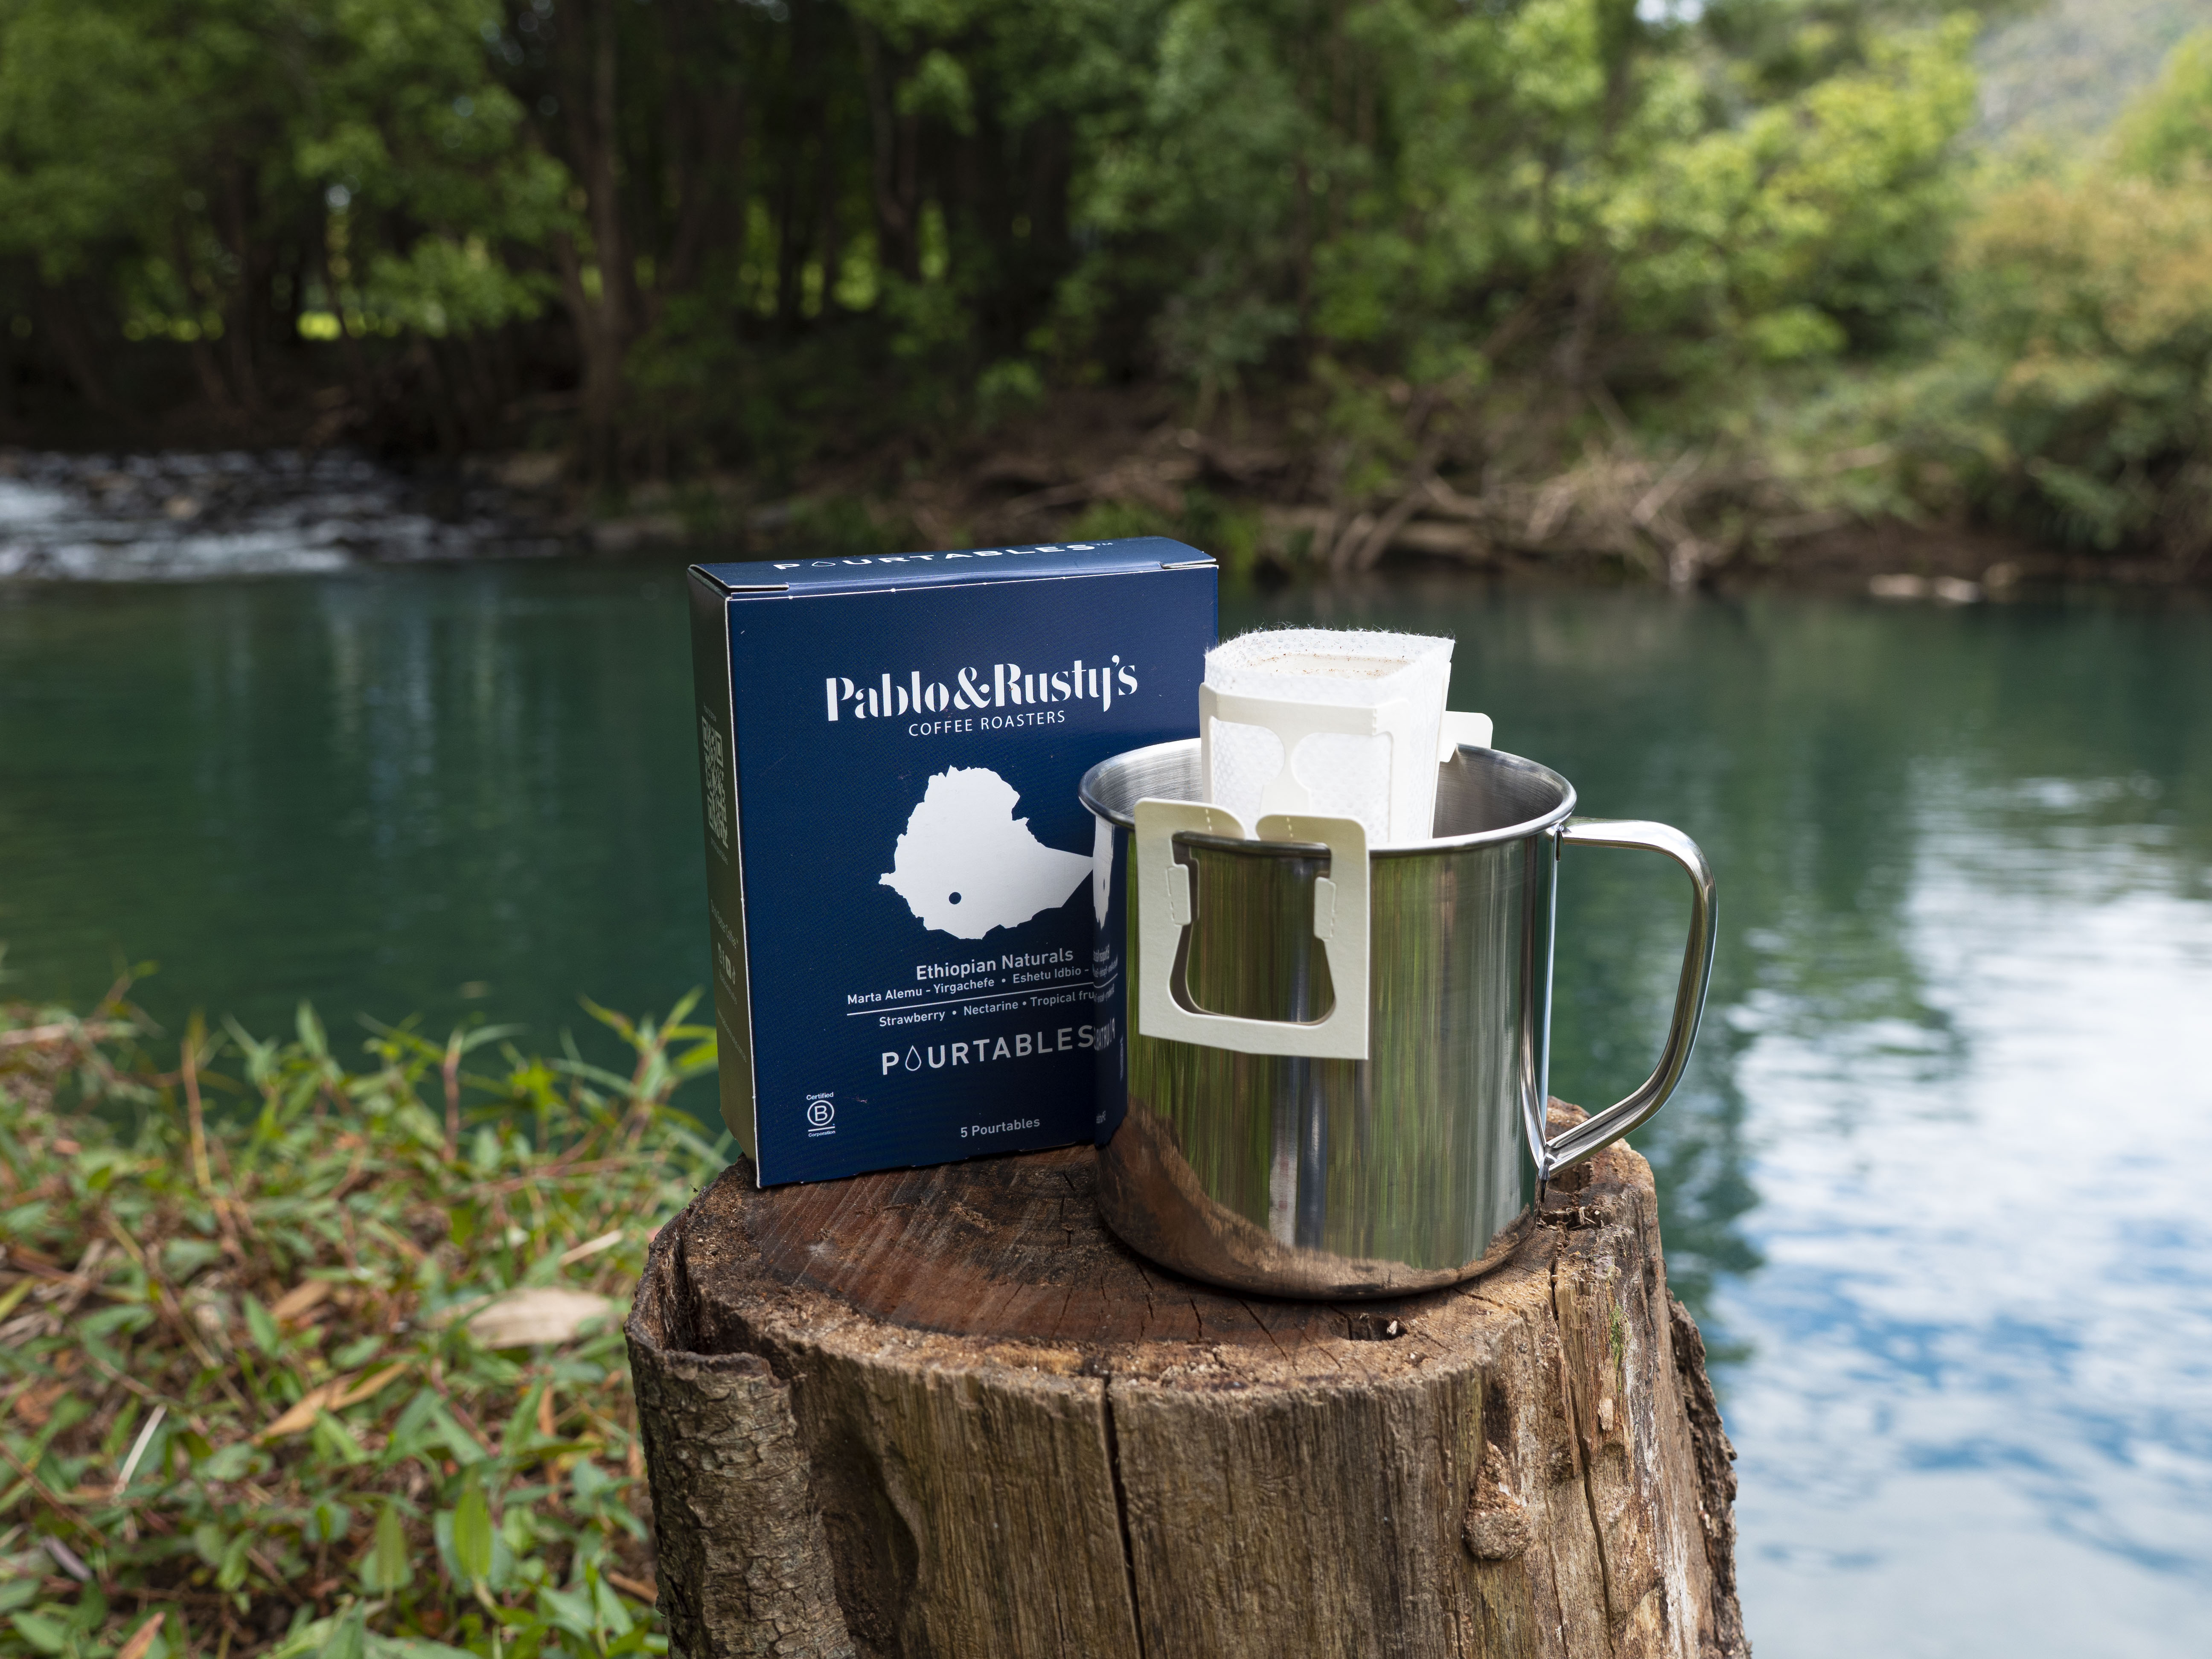 Pack of P&R Ethiopian Natural Pourtables resting on a log next to a cup, with a blue lake behind. 